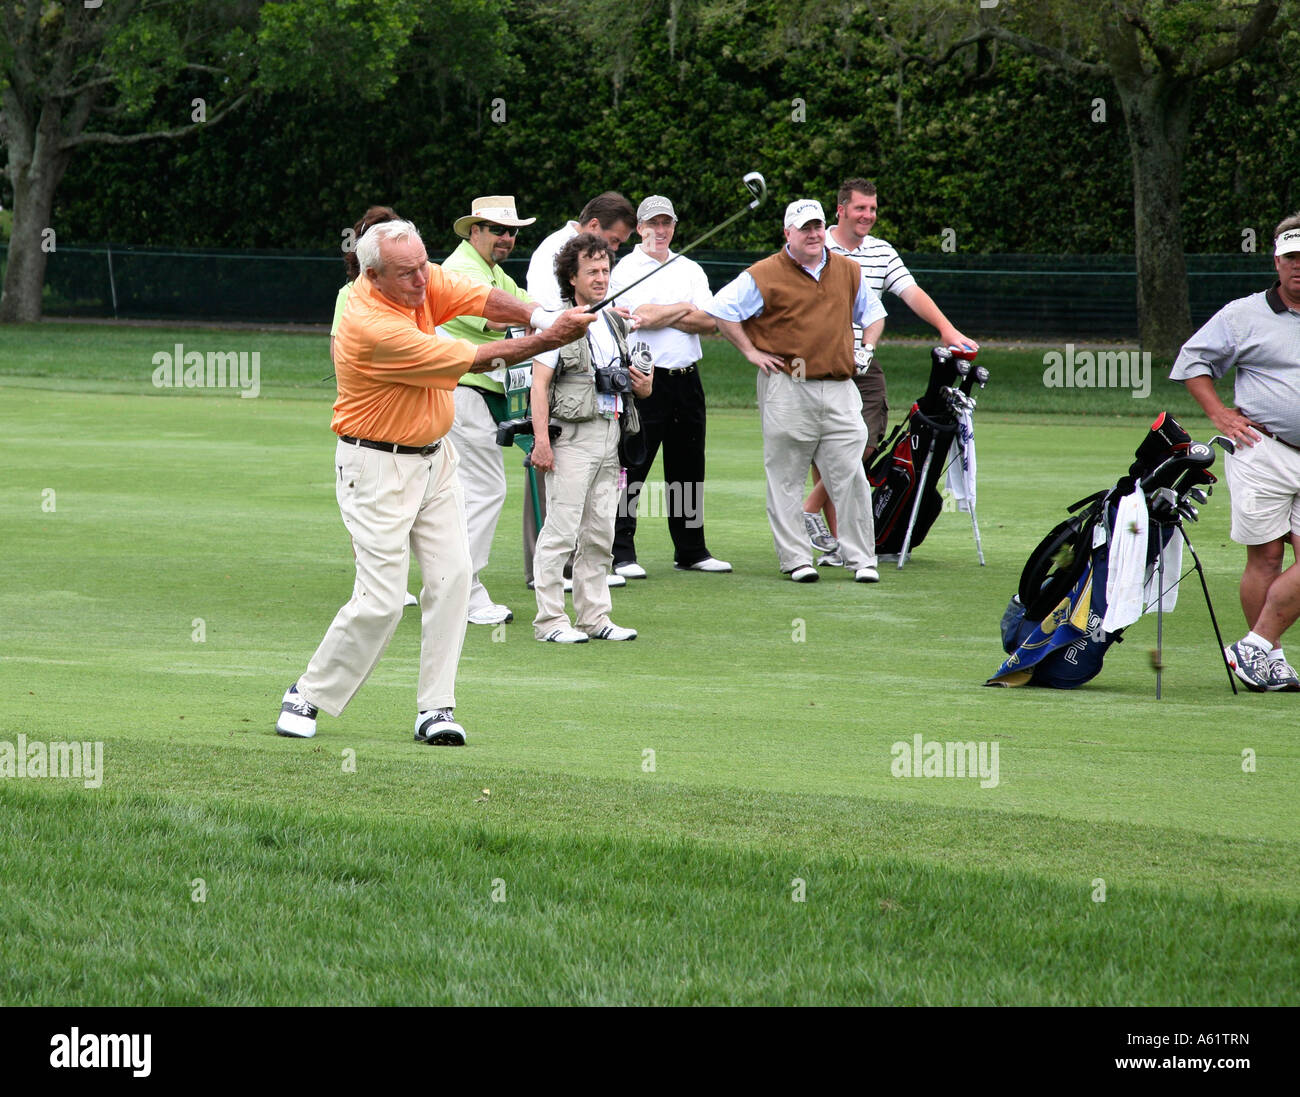 Arnold Palmer in his own Bay Hill Golf Tournament Stock Photo Alamy